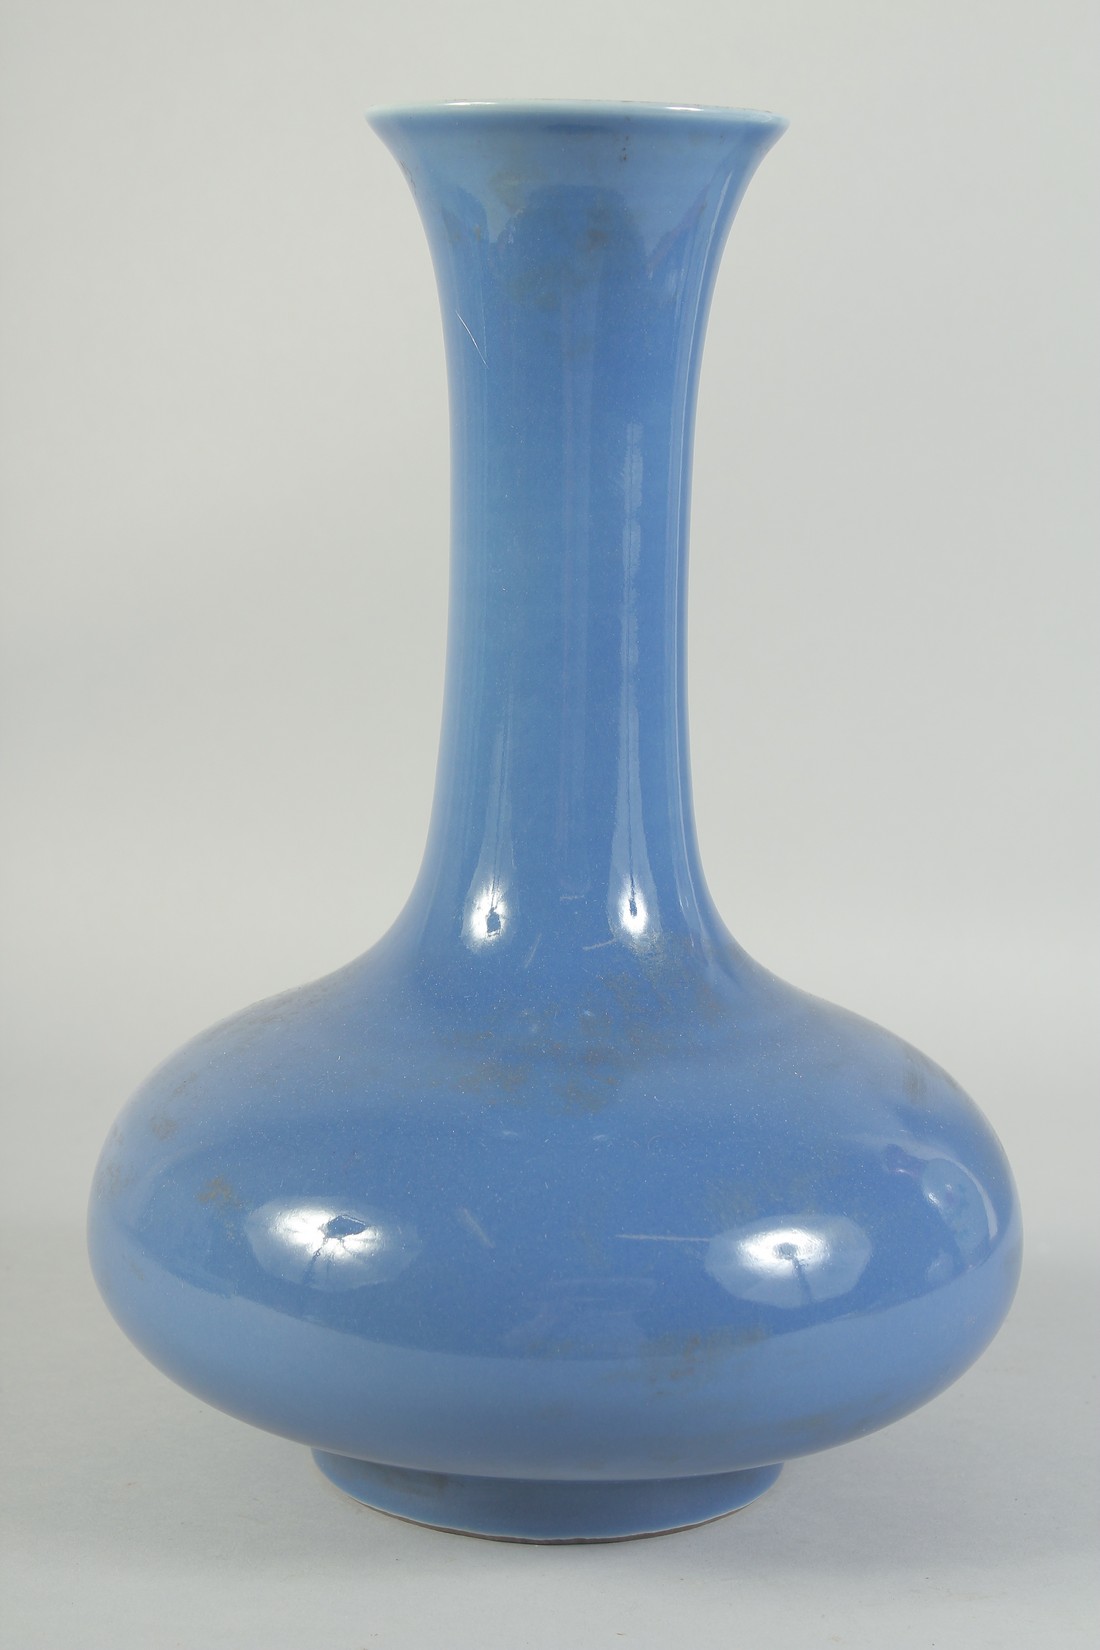 A CHINESE PORCELAIN BLUE BULBOUS VASE. 13ins high. - Image 2 of 4